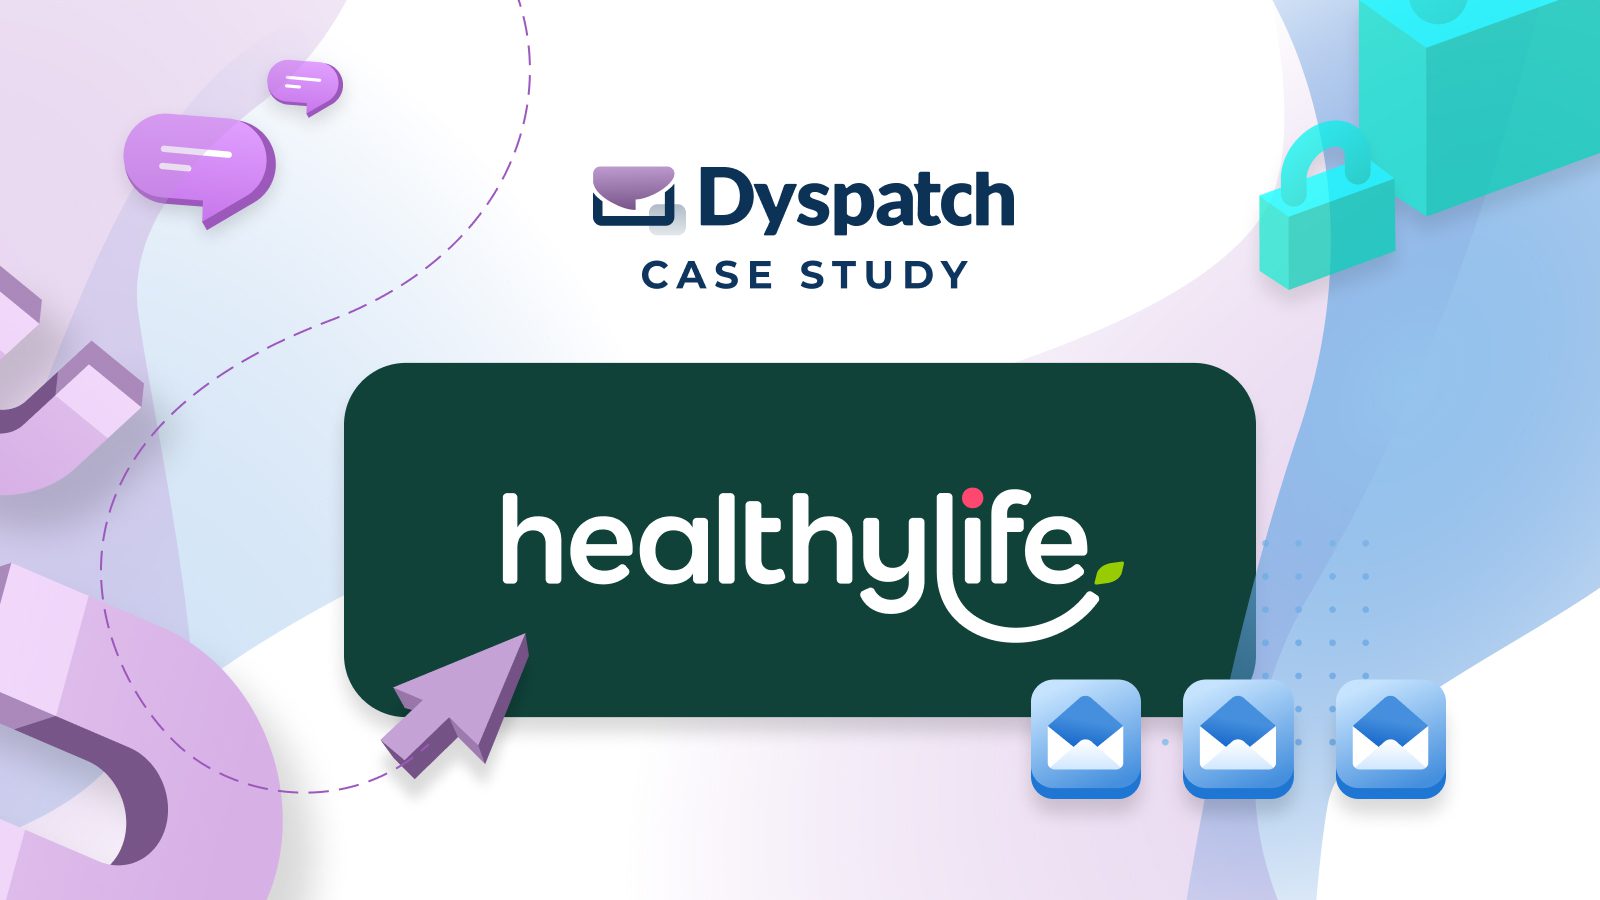 Case study - healthylife